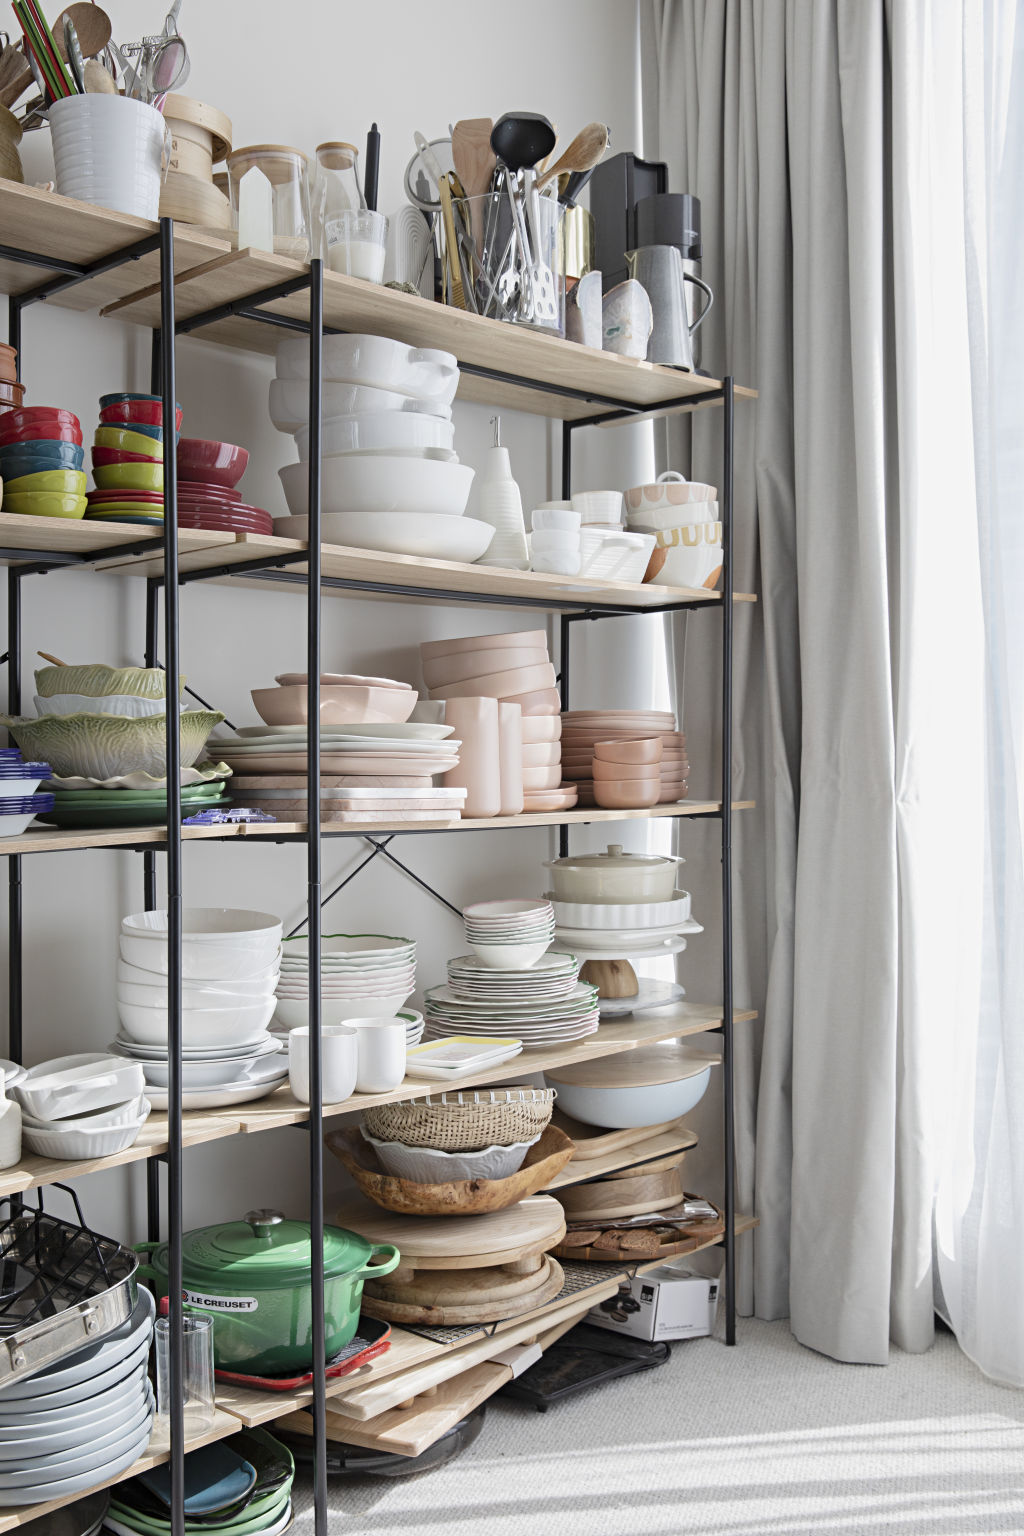 A spare bedroom was repurposed into 'the everything room', a storage space for Ong to keep his plethora of crockery. Photo: Natalie Jeffcott